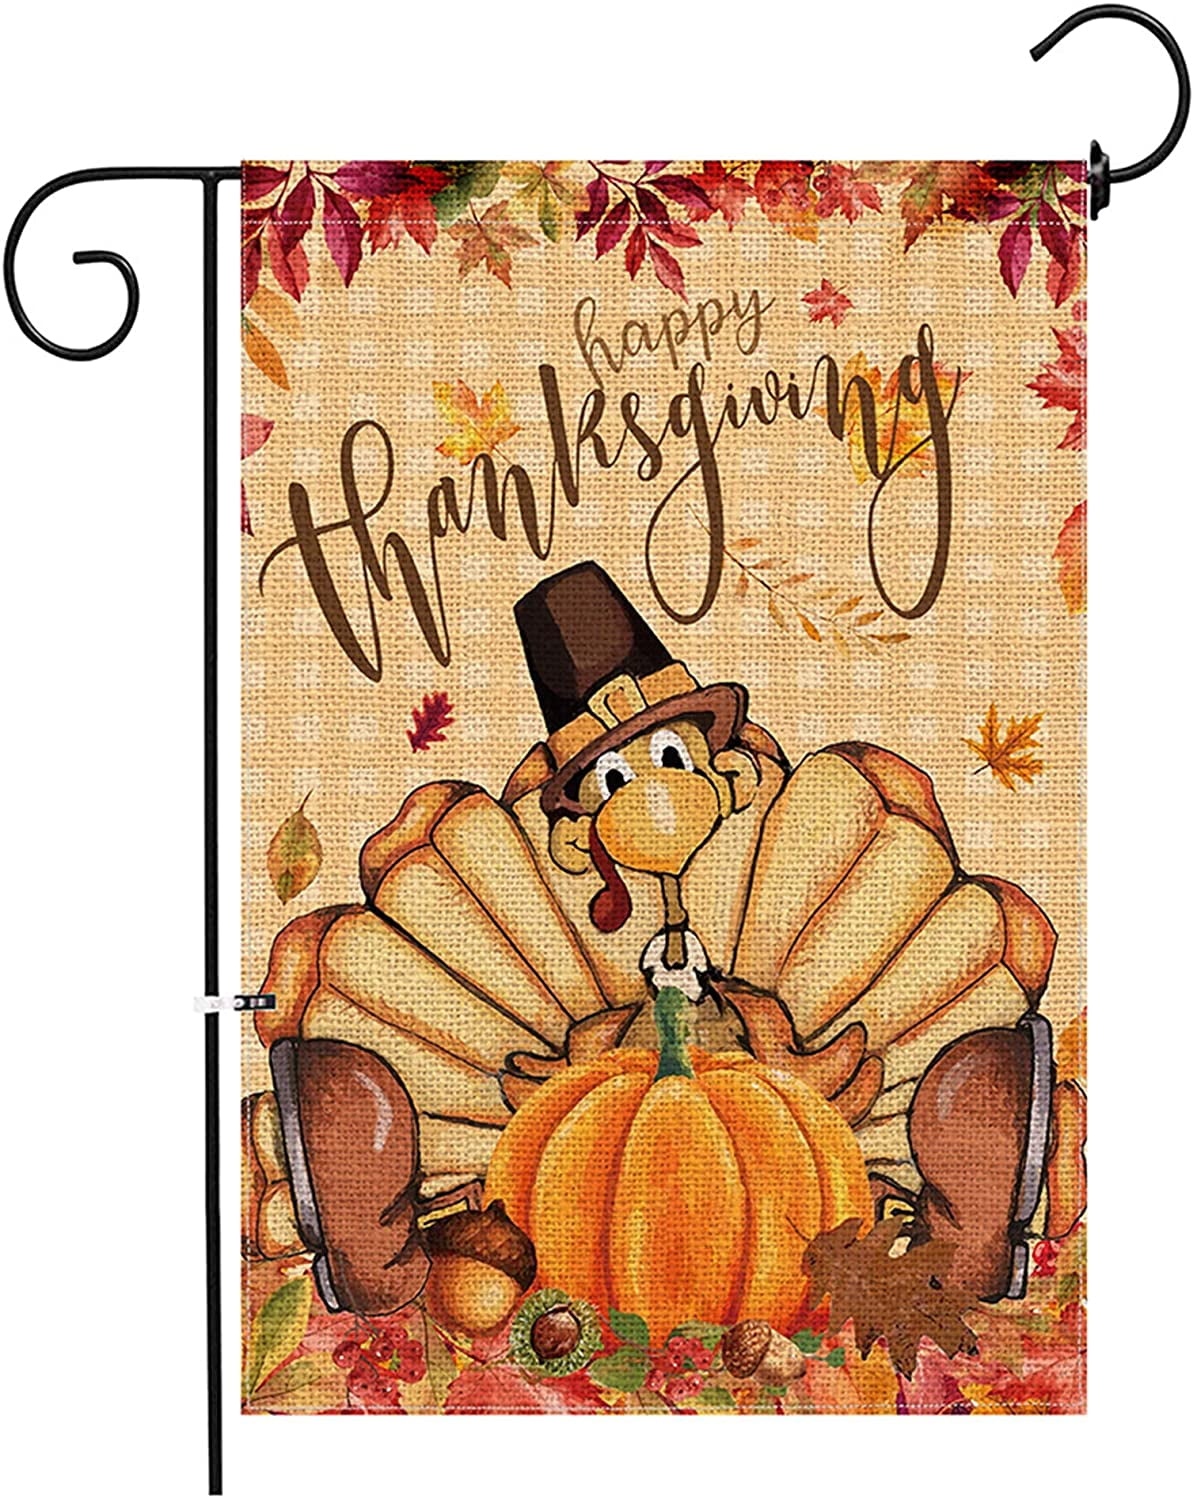 Thanksgiving Garden Flag Harvest Fall Holiday Home Outdoor Yard Lawn Seasonal Decorations Sign 12.5 x 18 Double Sided Funny Turkey Pumpkin Happy Thanksgiving Burlap Garden Flags Decorative